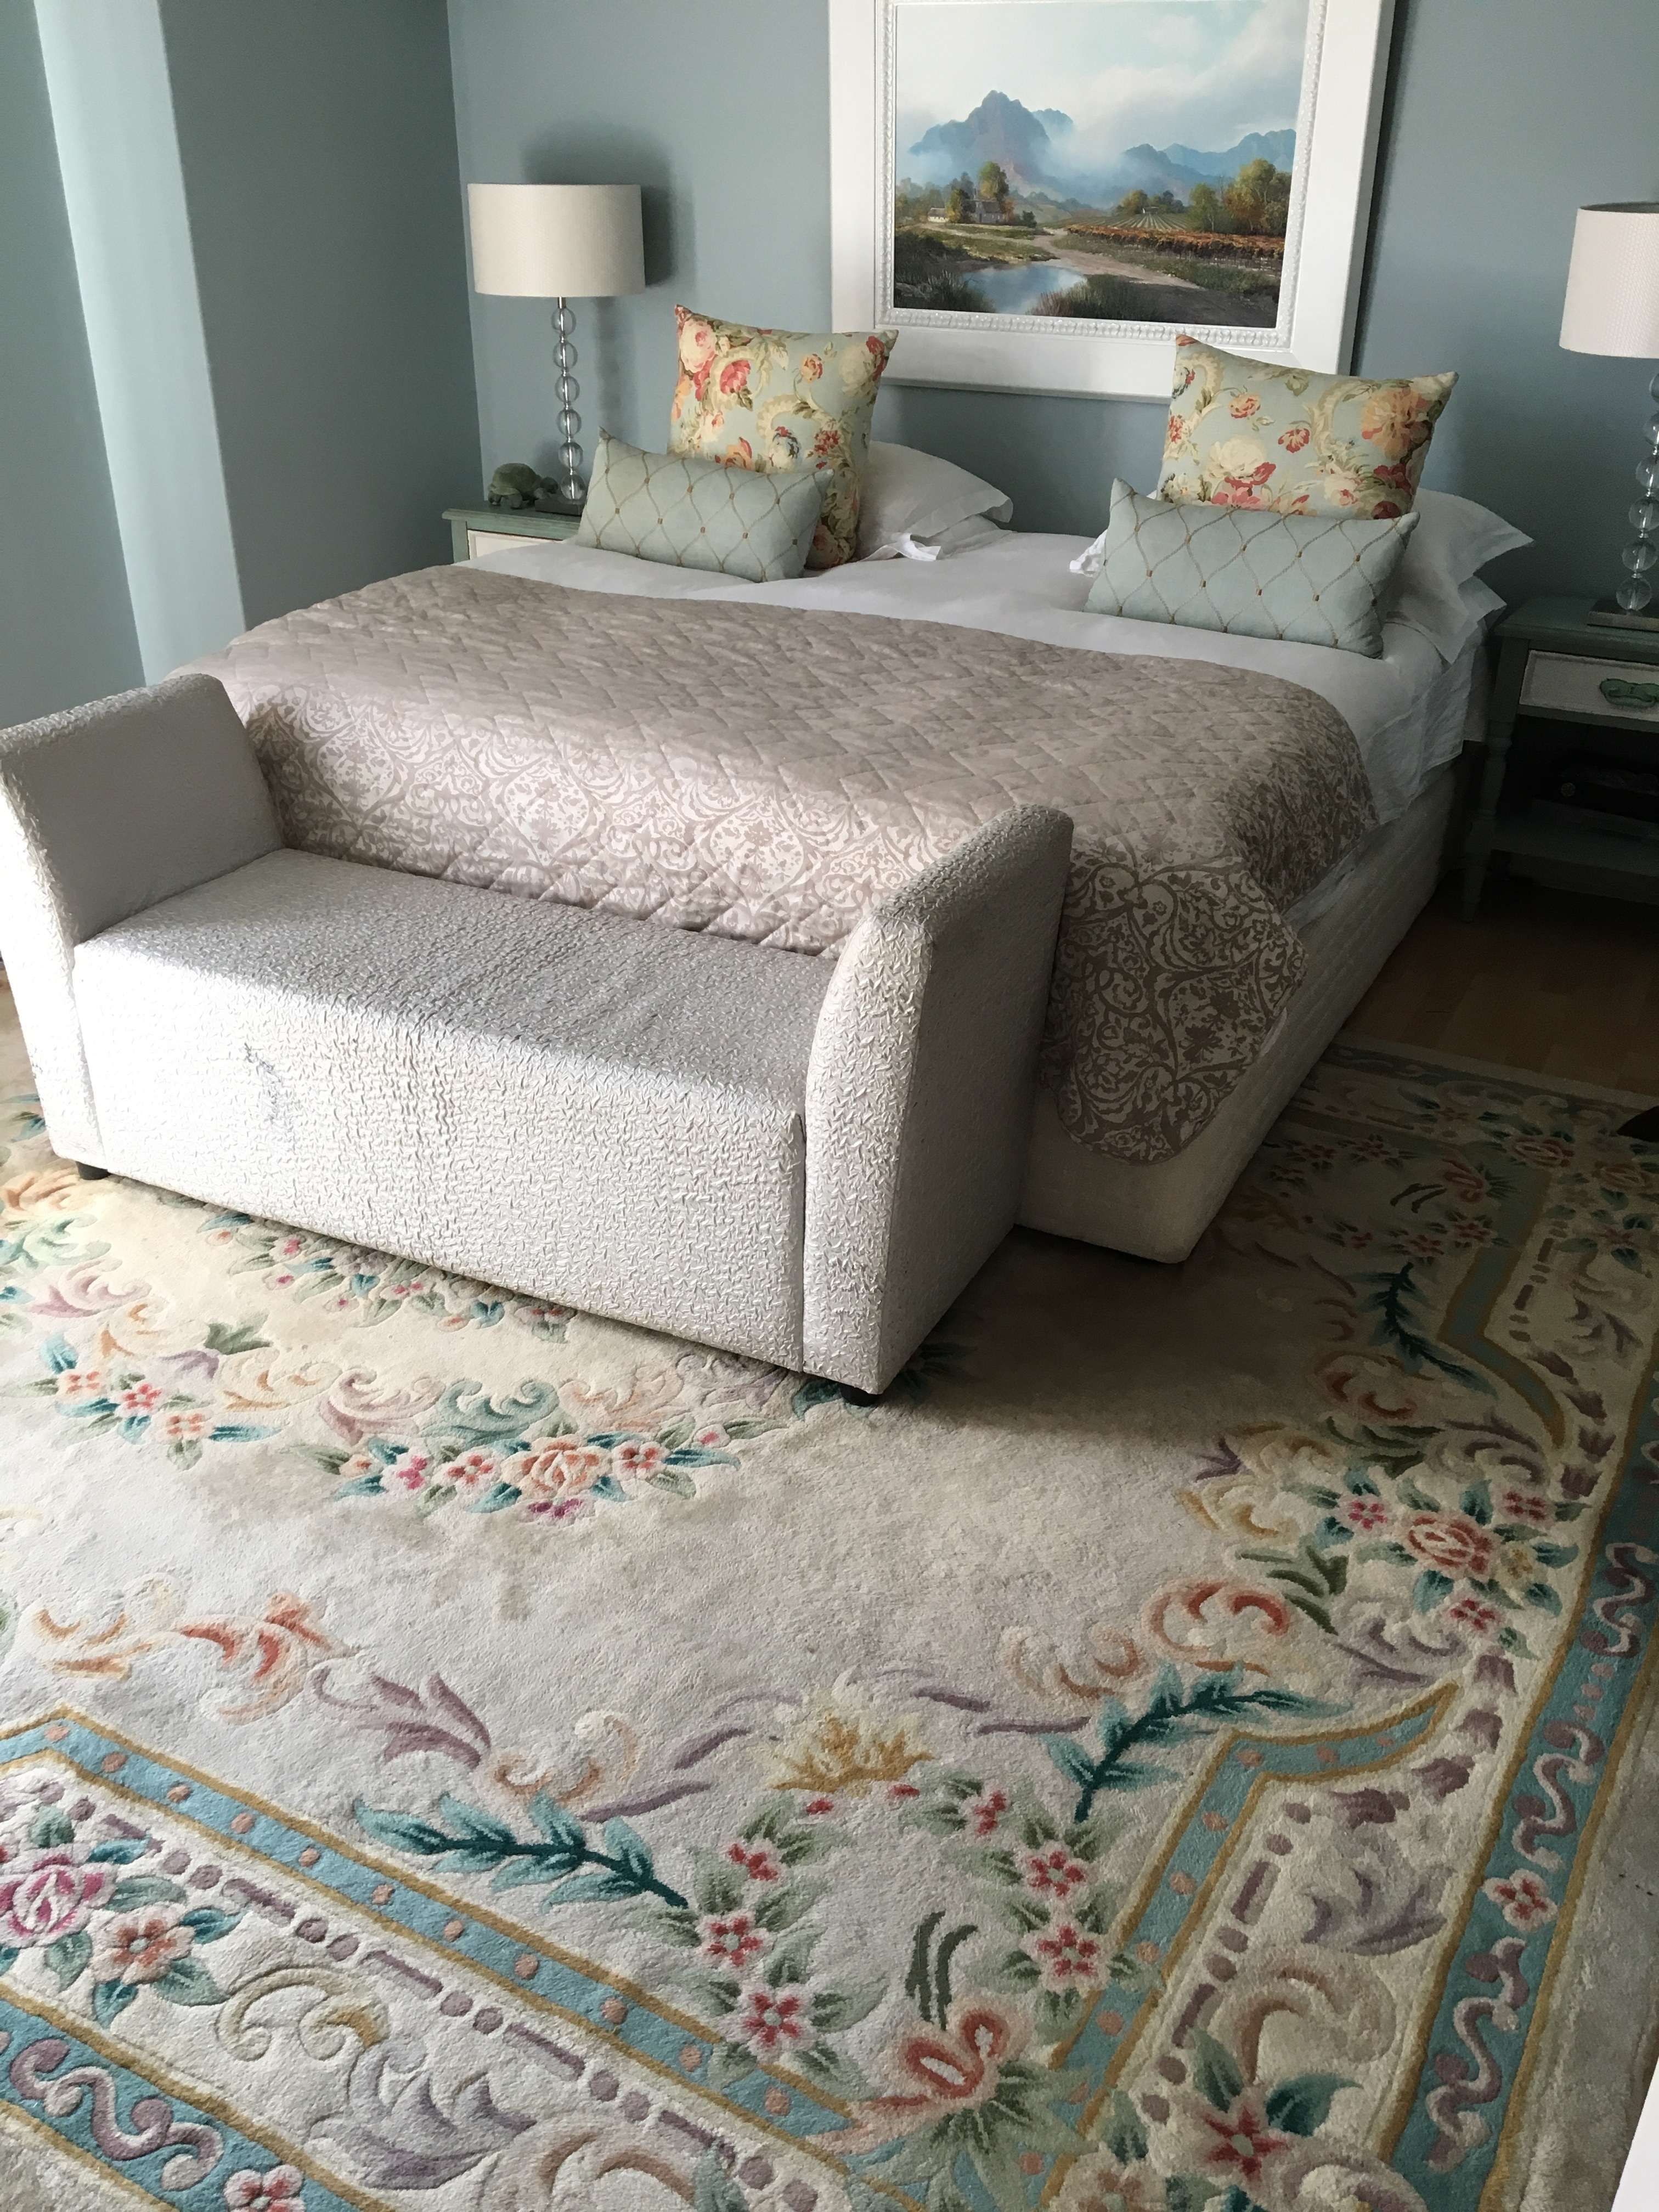 The oversized carpet half way under the bed - this option plays the role of bedside carpets and coverage at the foot of the bed